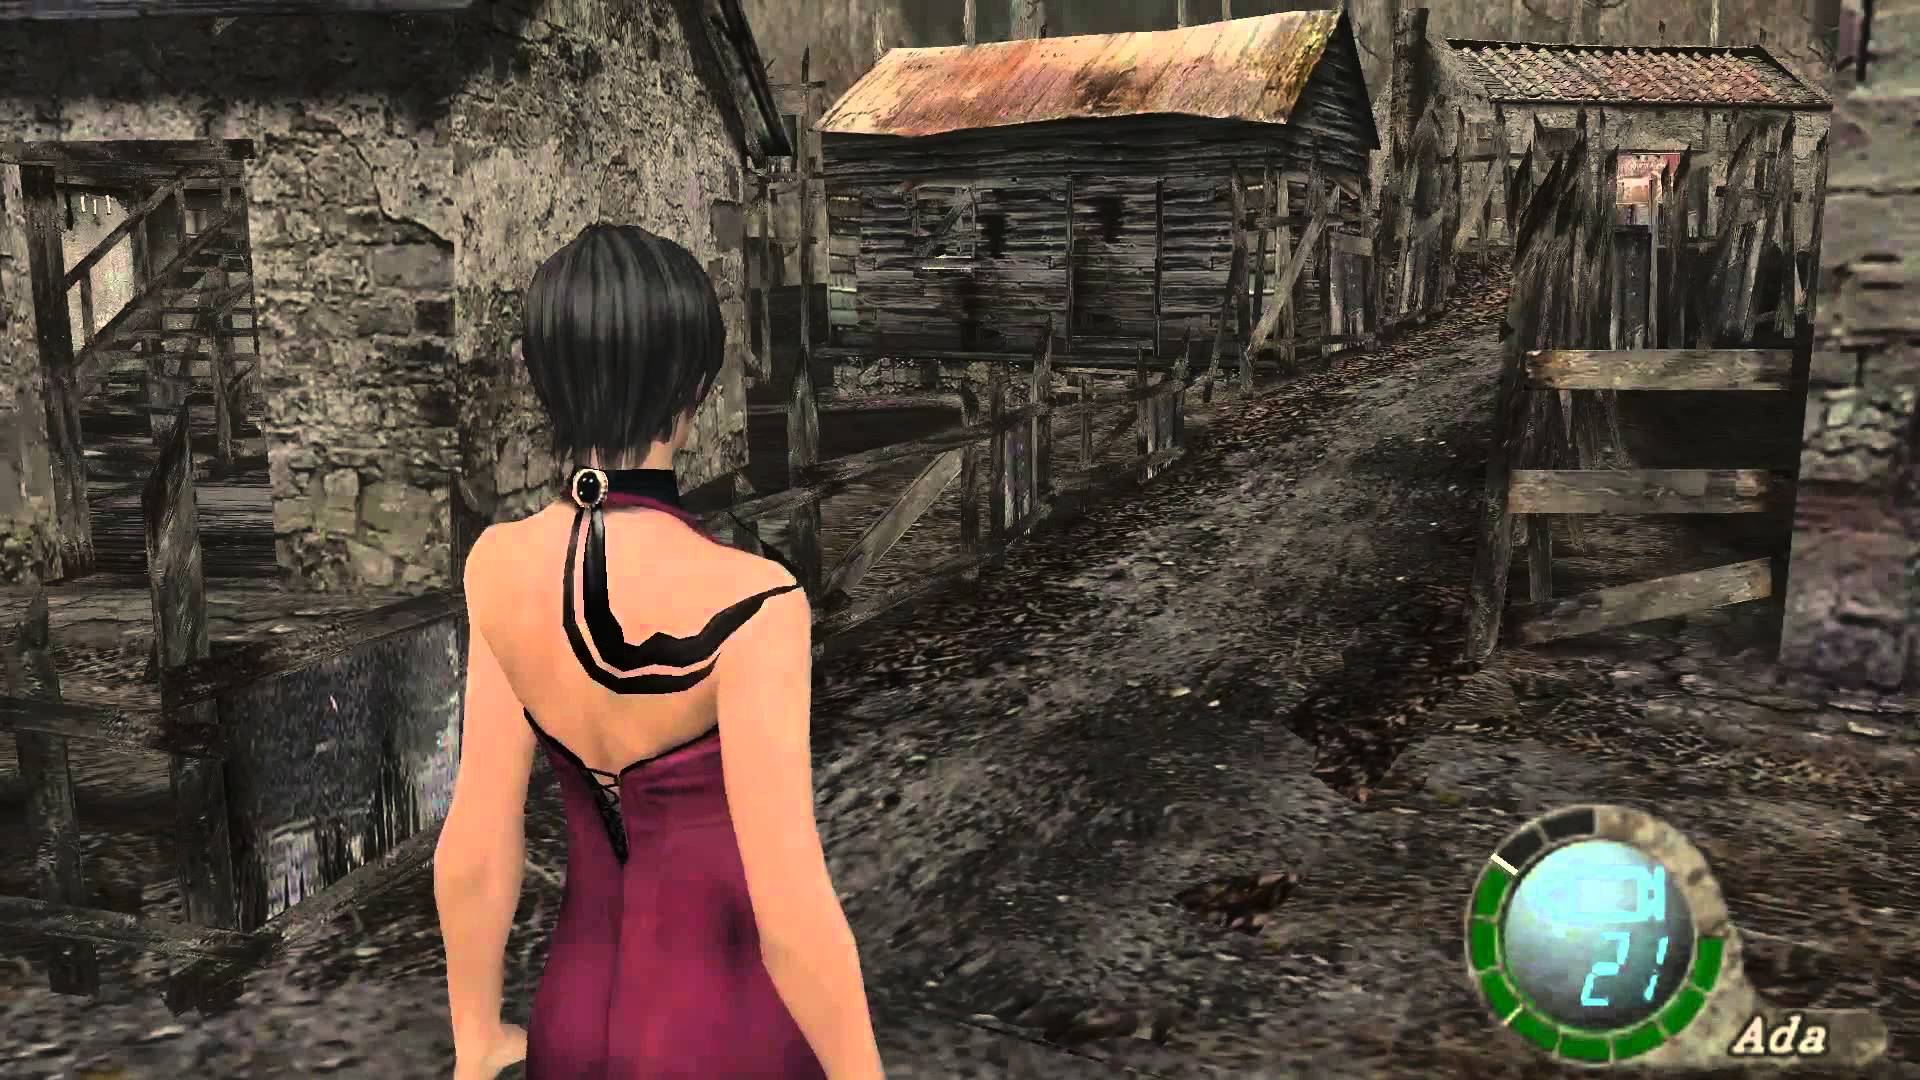 Resident Evil 4 Ultimate Hd Edition Cracked